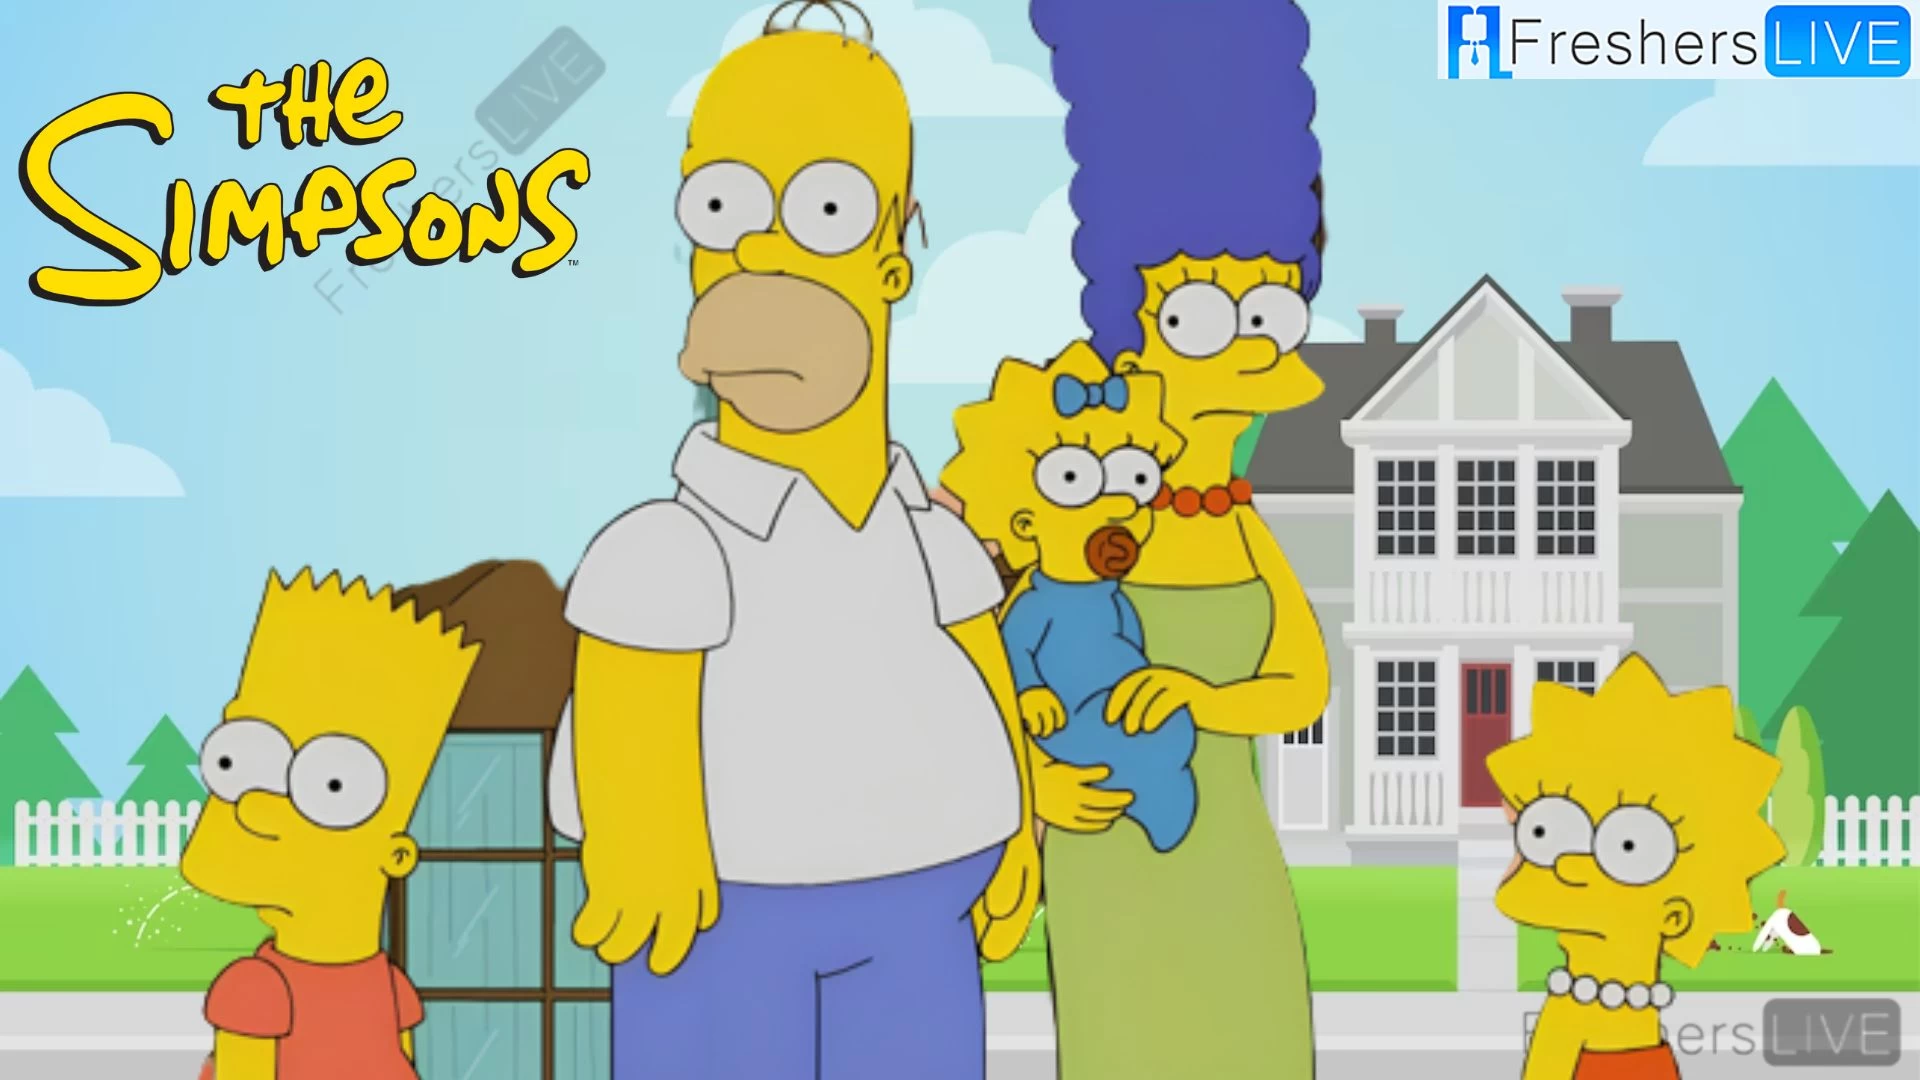 The Simpsons Season 35 Episode 1 Ending Explained, Release Date, Cast, Review, Plot, Where to Watch and More